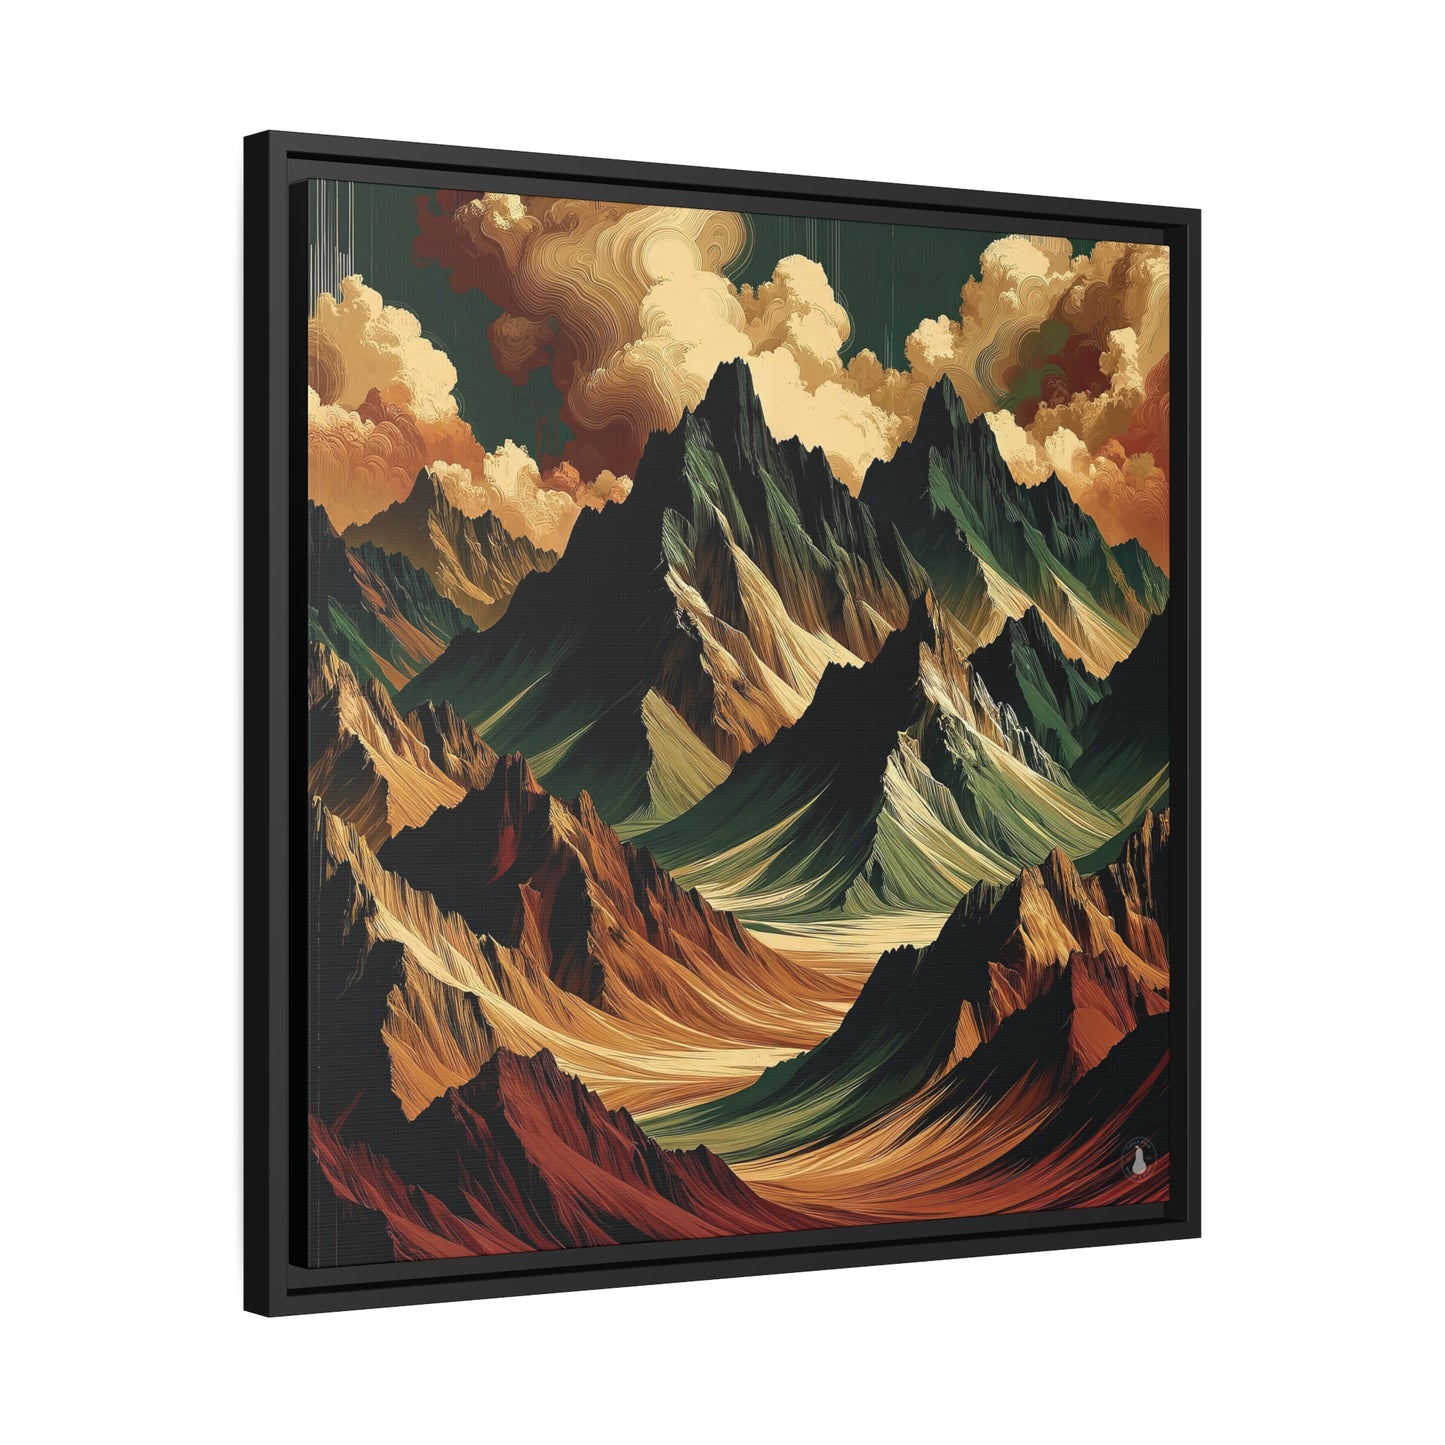 Majestic Mountains | Digital Abstract Work of Art | FRAMED CANVAS WRAP